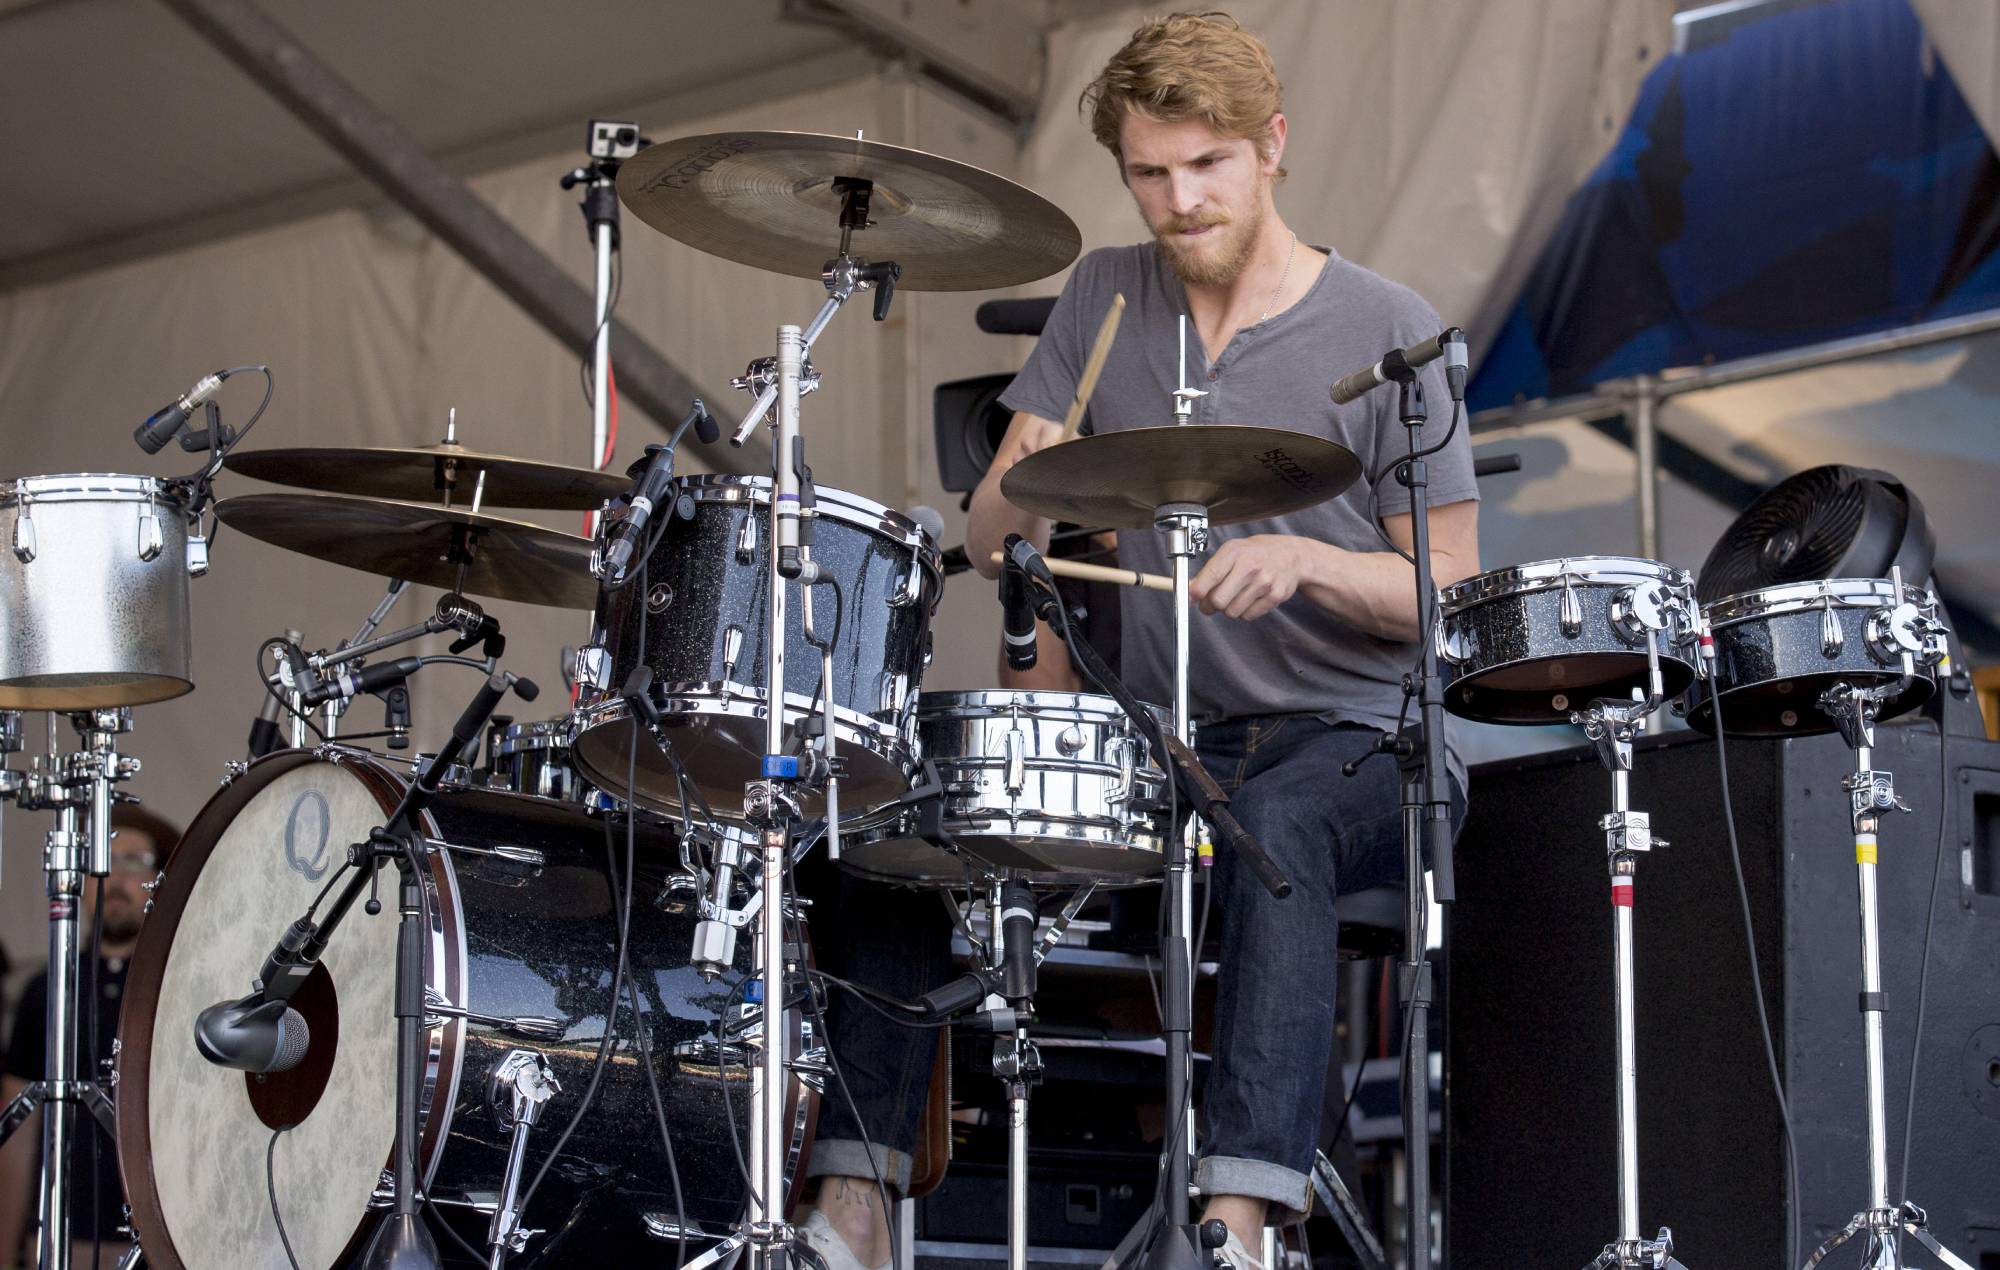 Foster the People drummer Mark Pontius leaves band after 11 years